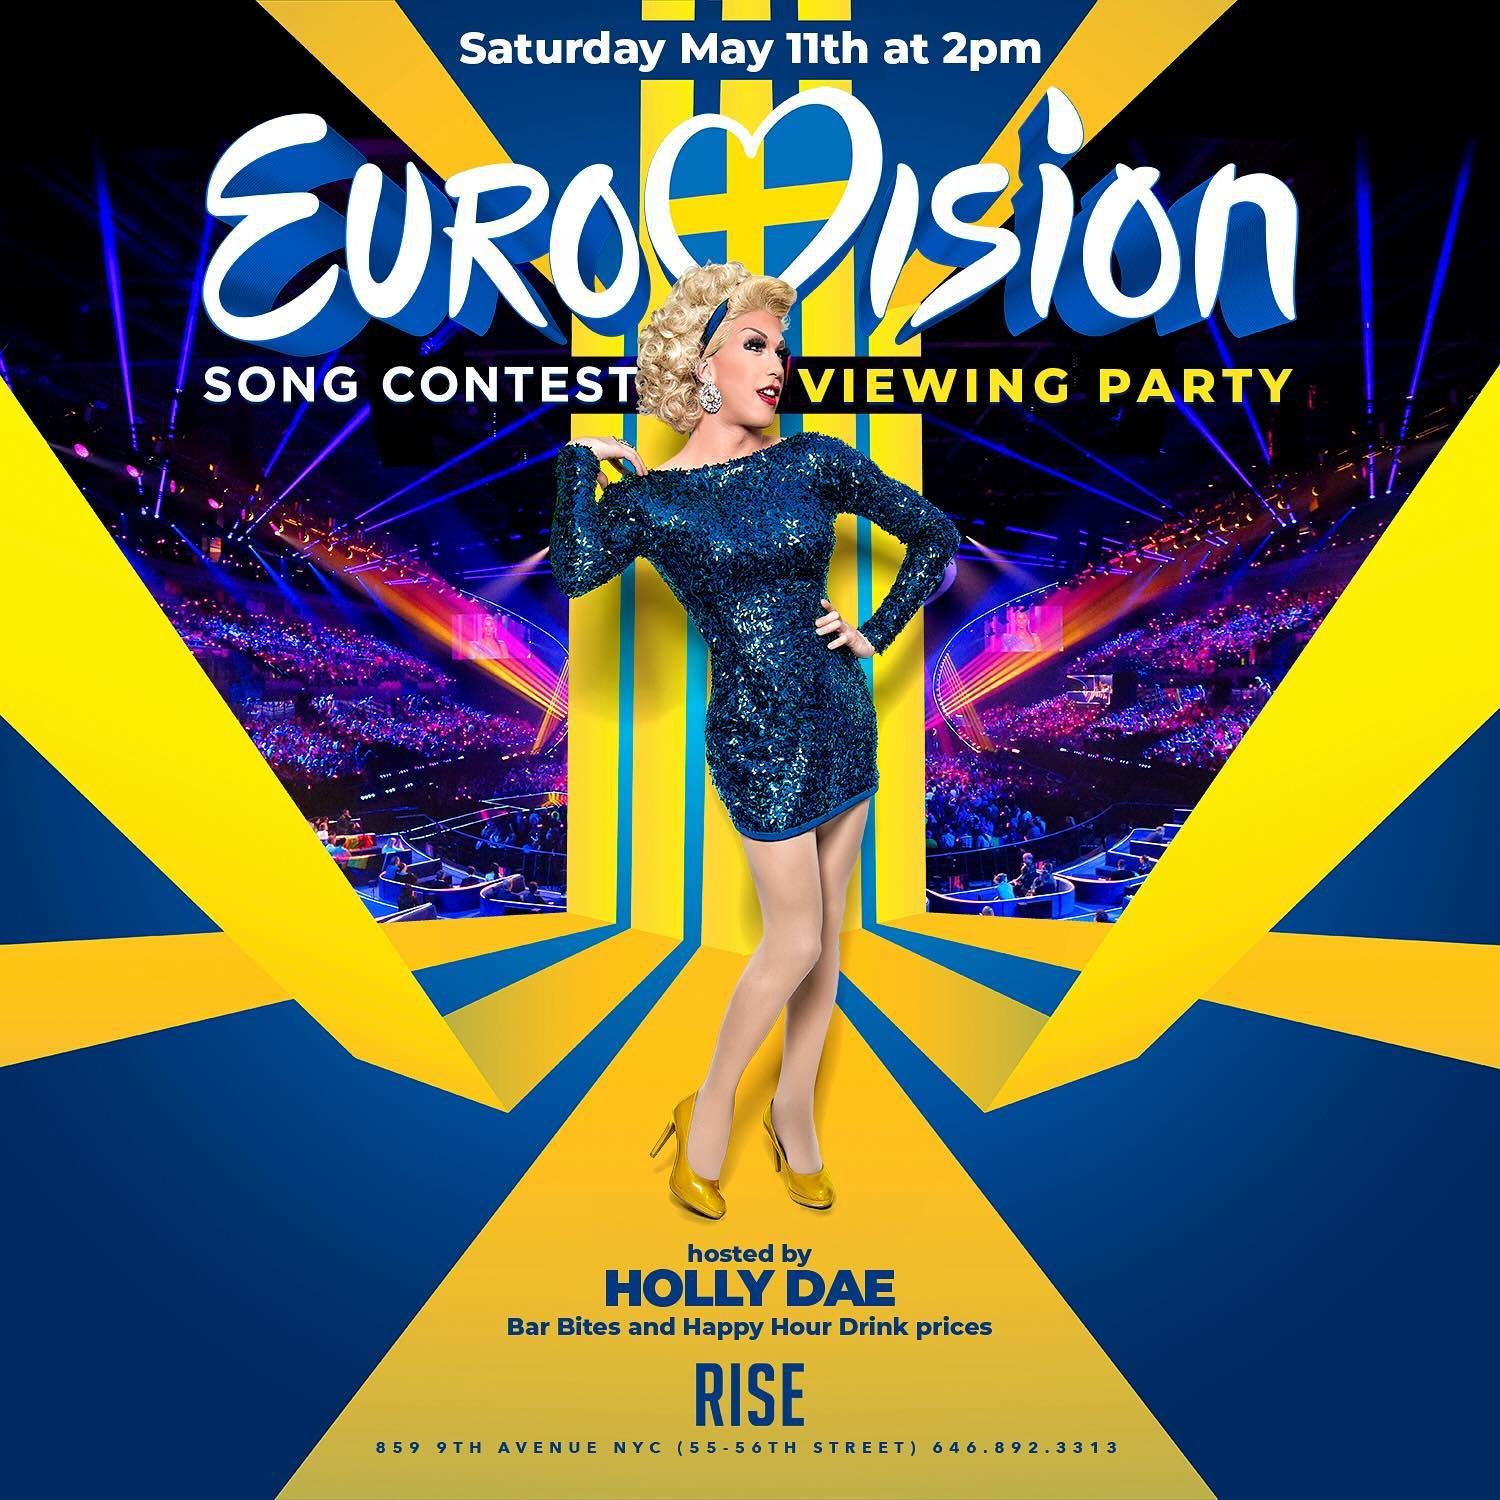 TODAY at 2pm! Holly Dae hosts Rise&rsquo;s Eurovision party! Happy hour until 9! Live stream at 3!